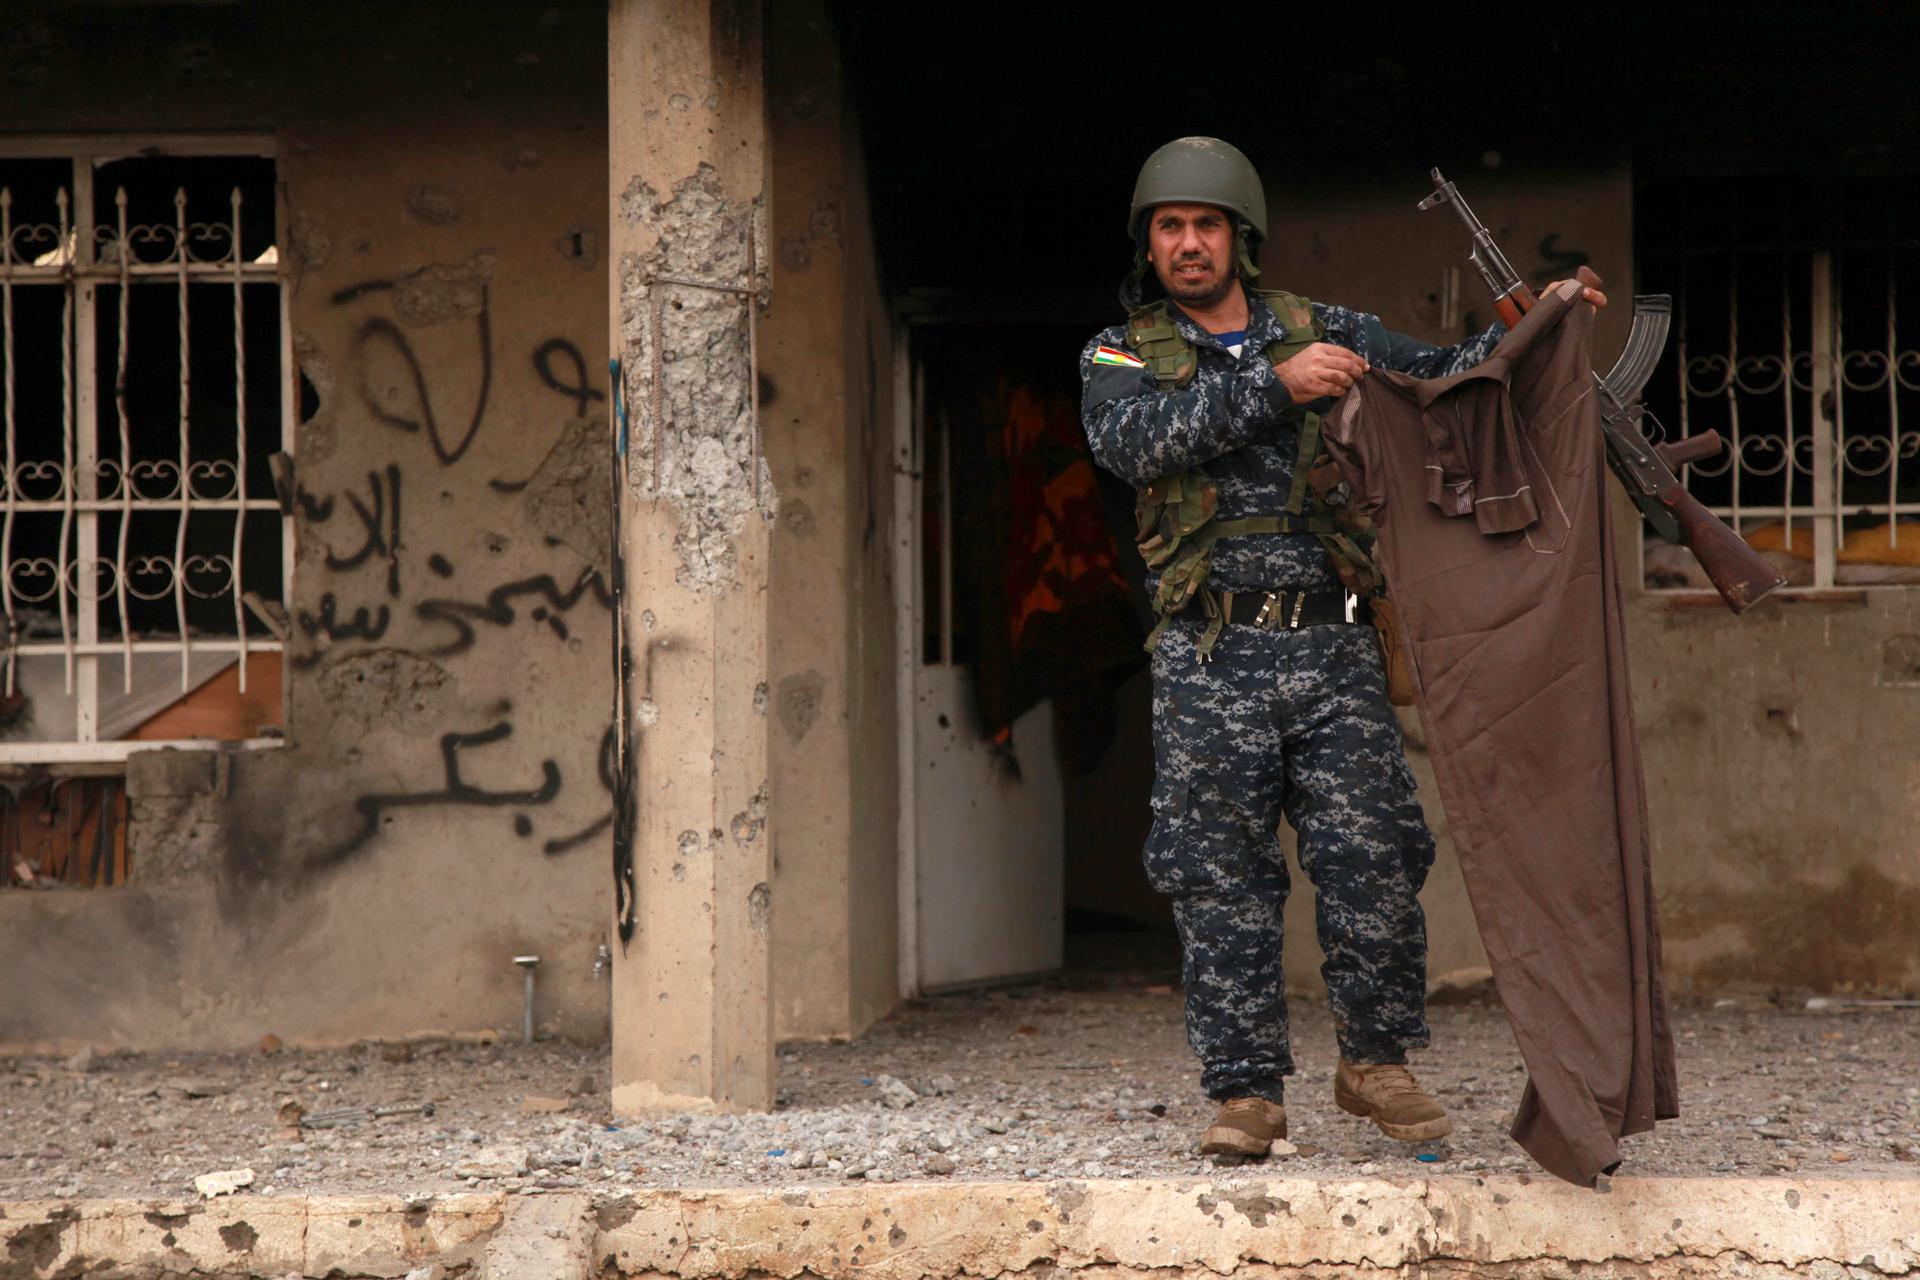 A Kurdish peshmerga fighter holds up a piece of clothing worn by an ISIS fighter on December 18, 2014. Kurdish peshmerga fighters have fought their way to Iraq's Sinjar mountain and freed hundreds of people trapped there by ISIS.